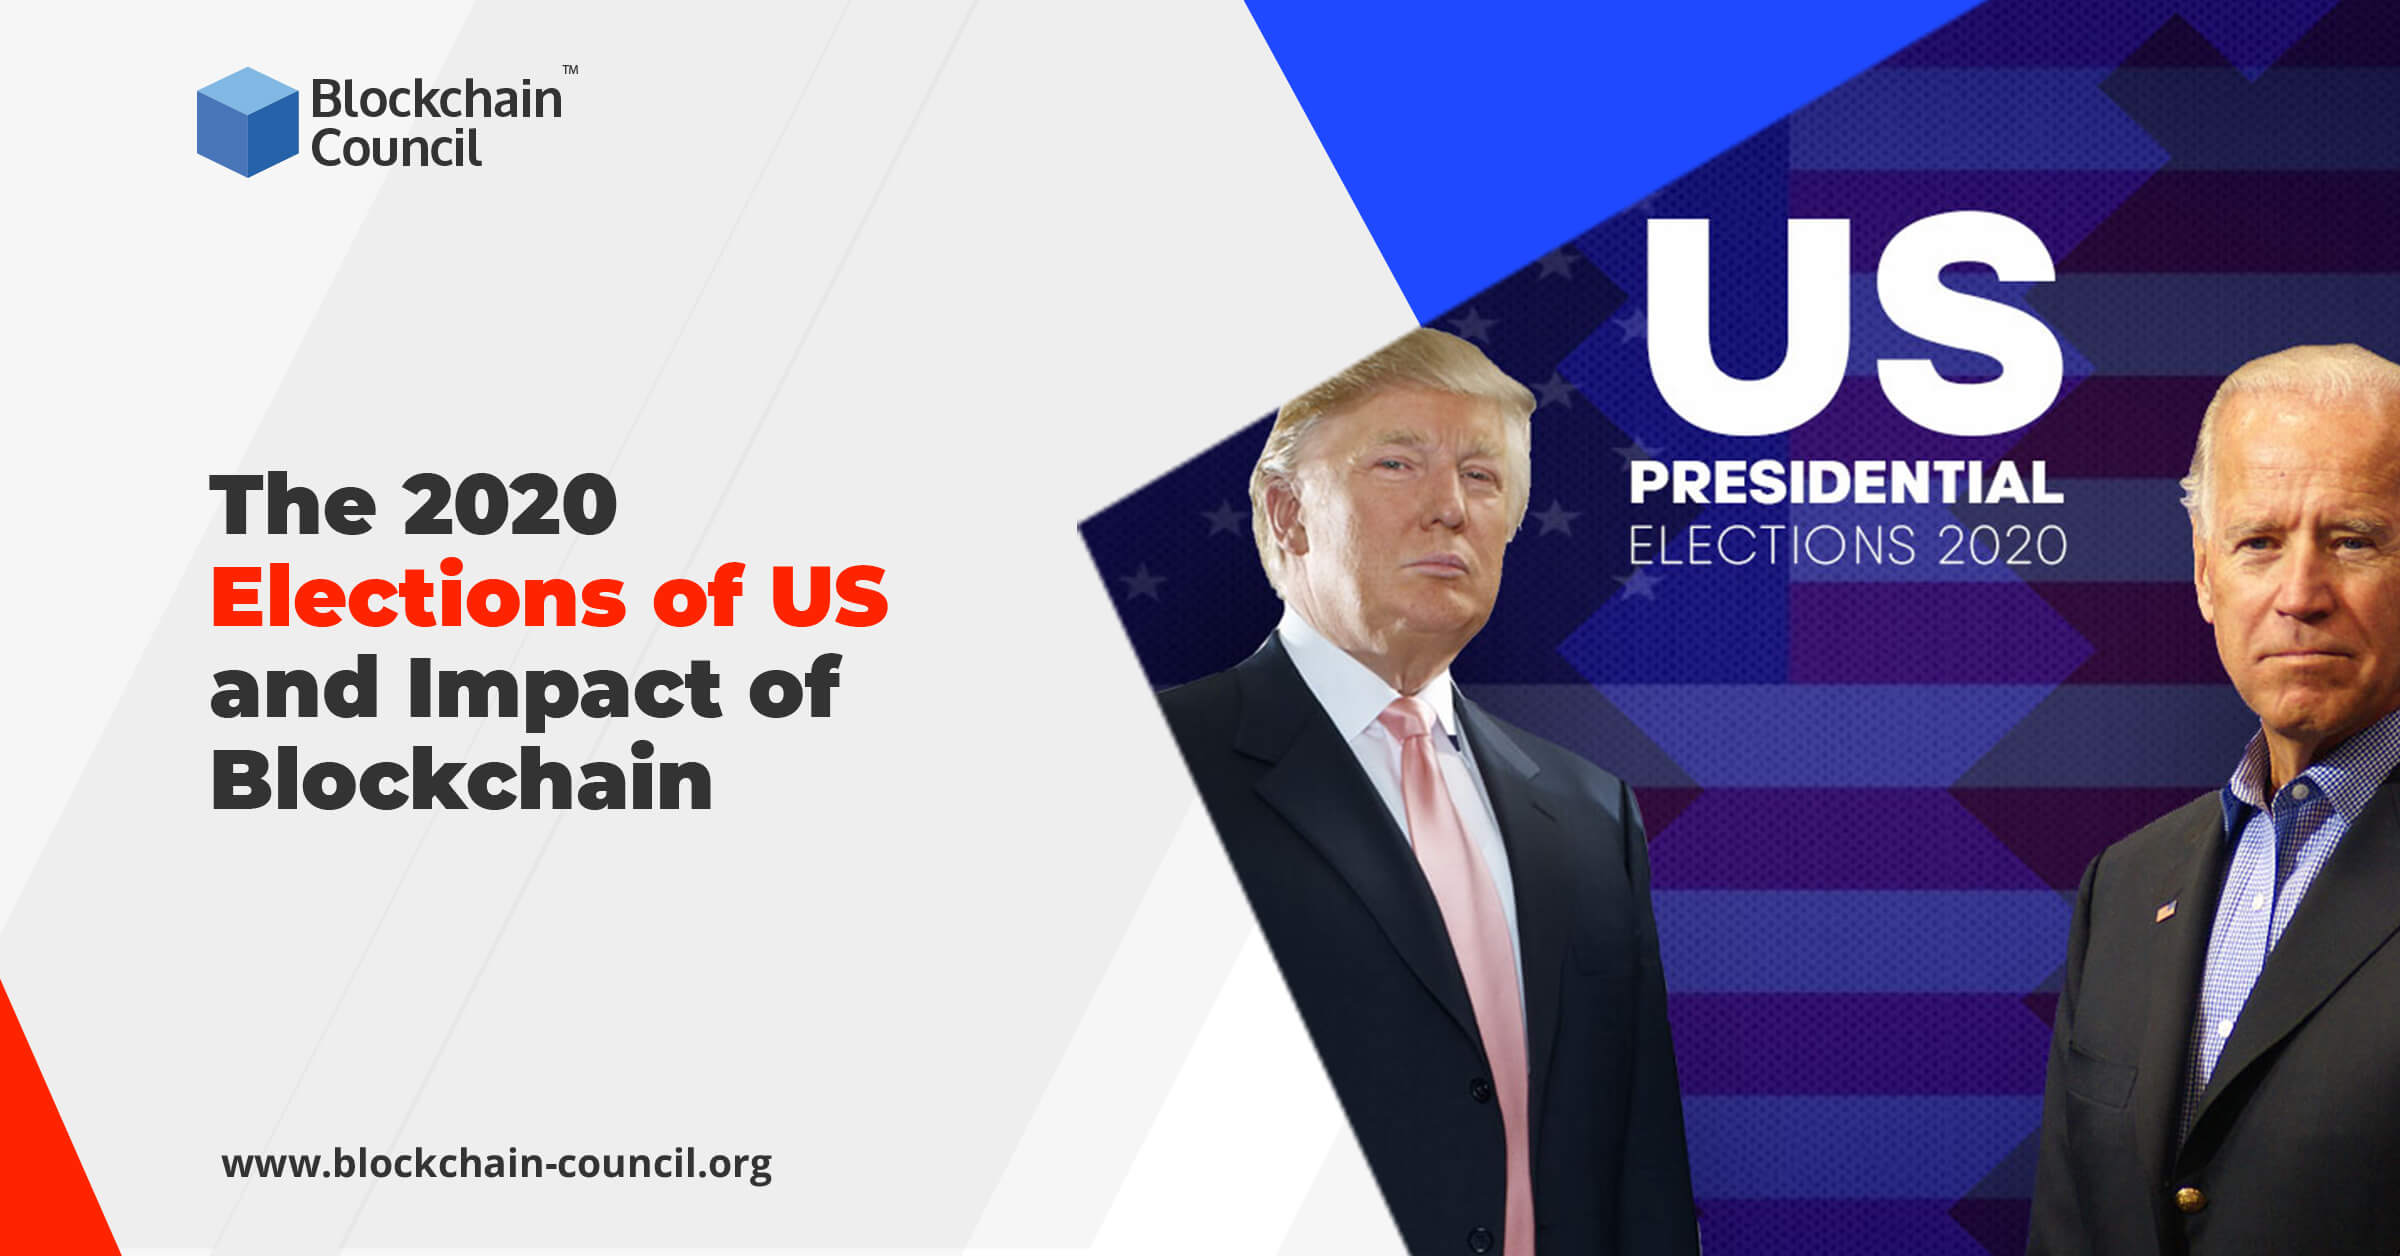 The 2020 Elections of US and Impact of Blockchain